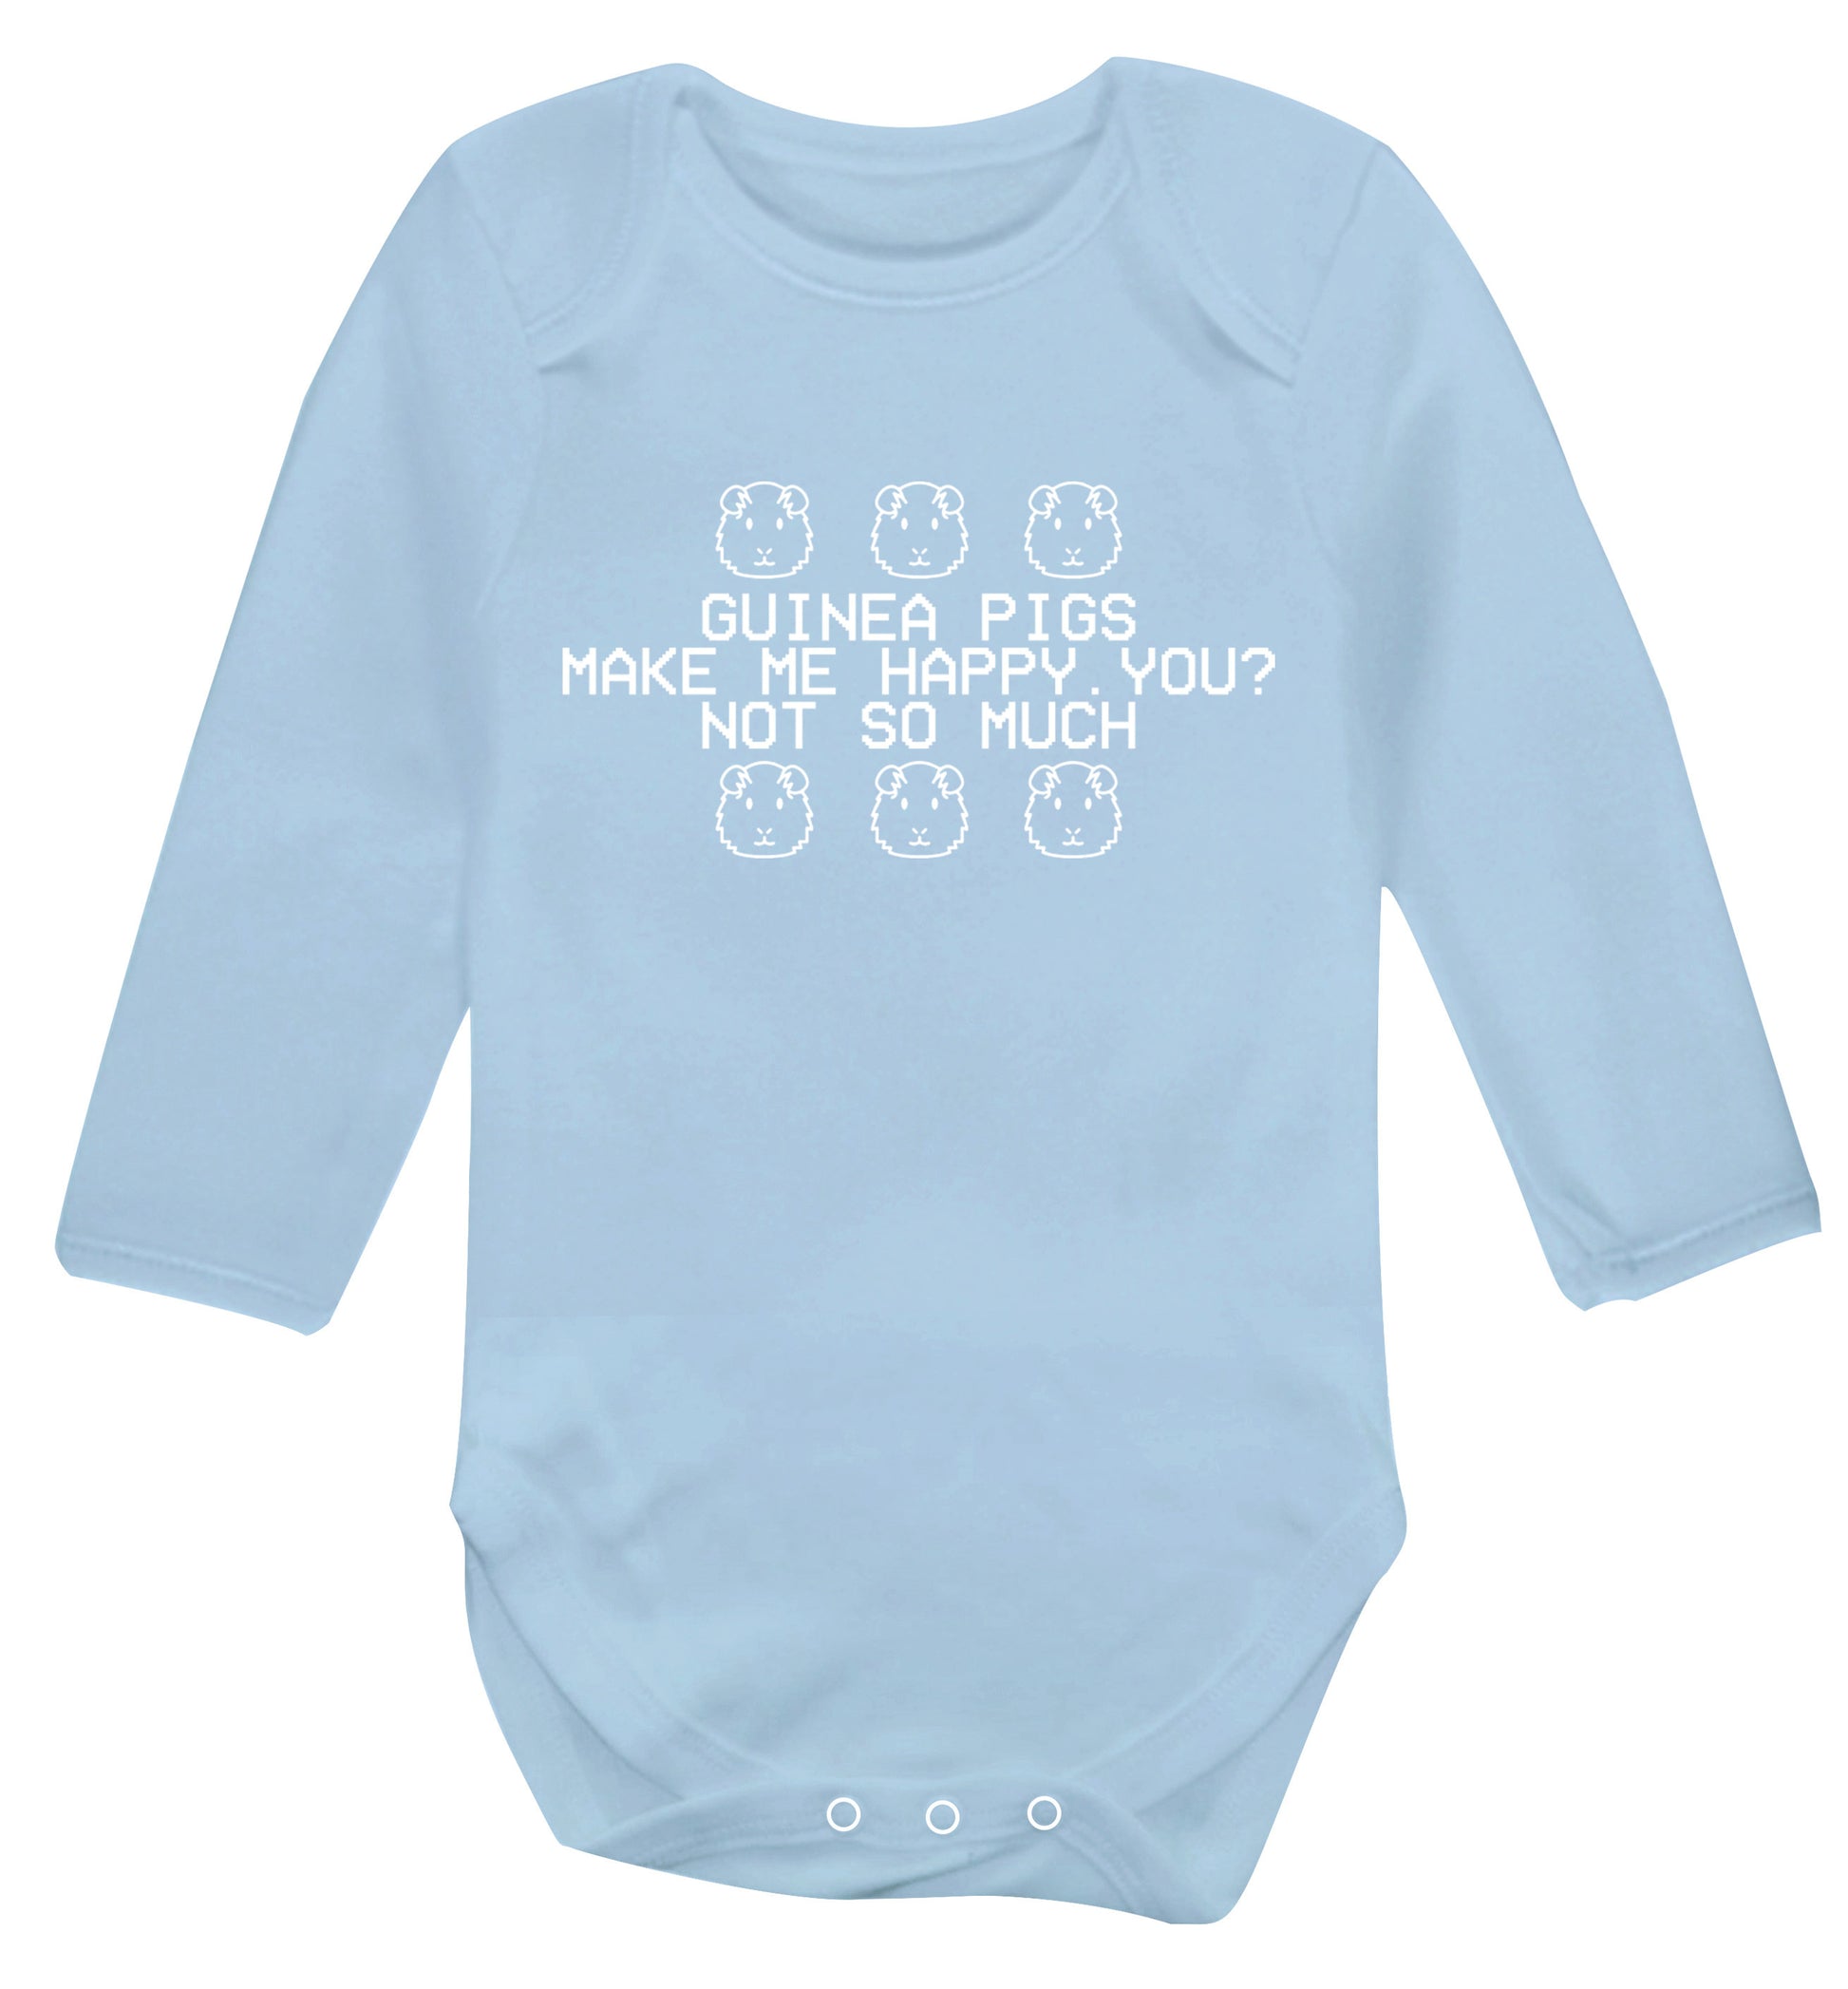 Guinea pigs make me happy, you not so much Baby Vest long sleeved pale blue 6-12 months